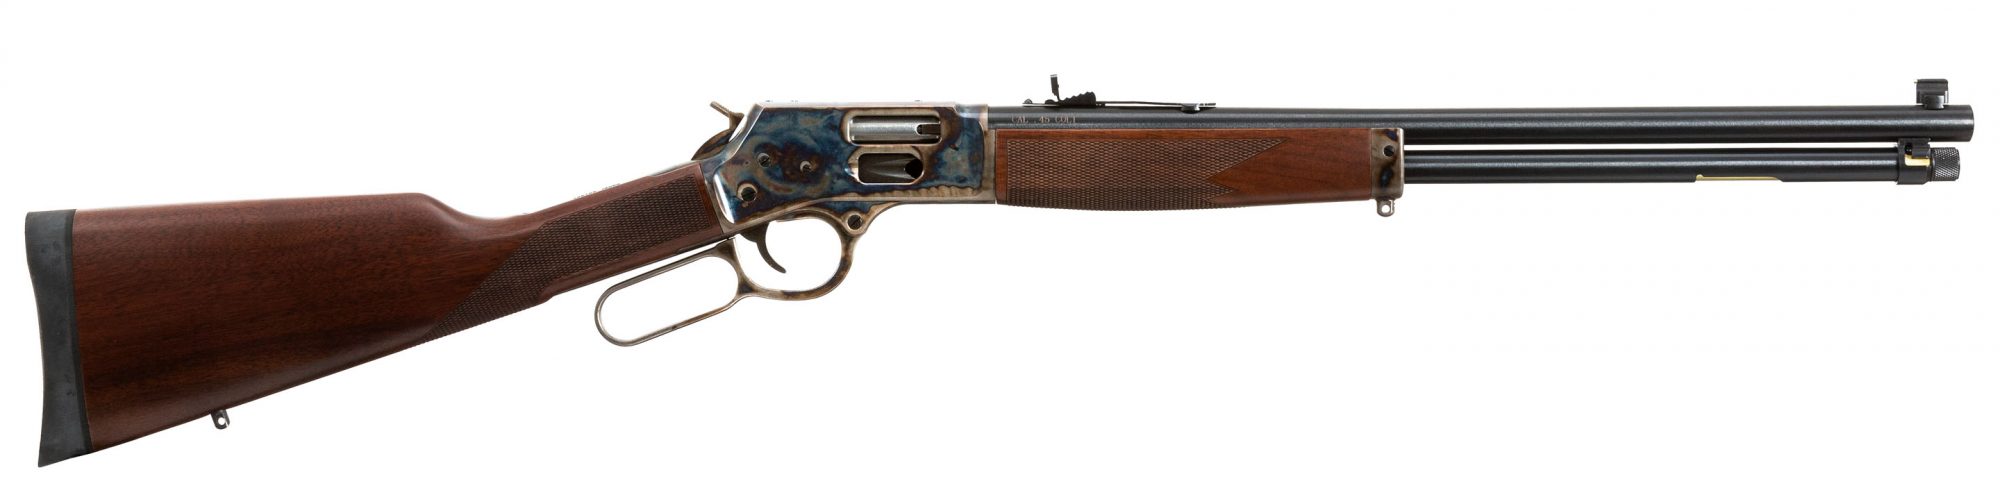 Photo of a color case hardened Henry Big Boy Steel Side Gate rifle, featuring bone charcoal color case hardening by Turnbull Restoration of Bloomfield, NY